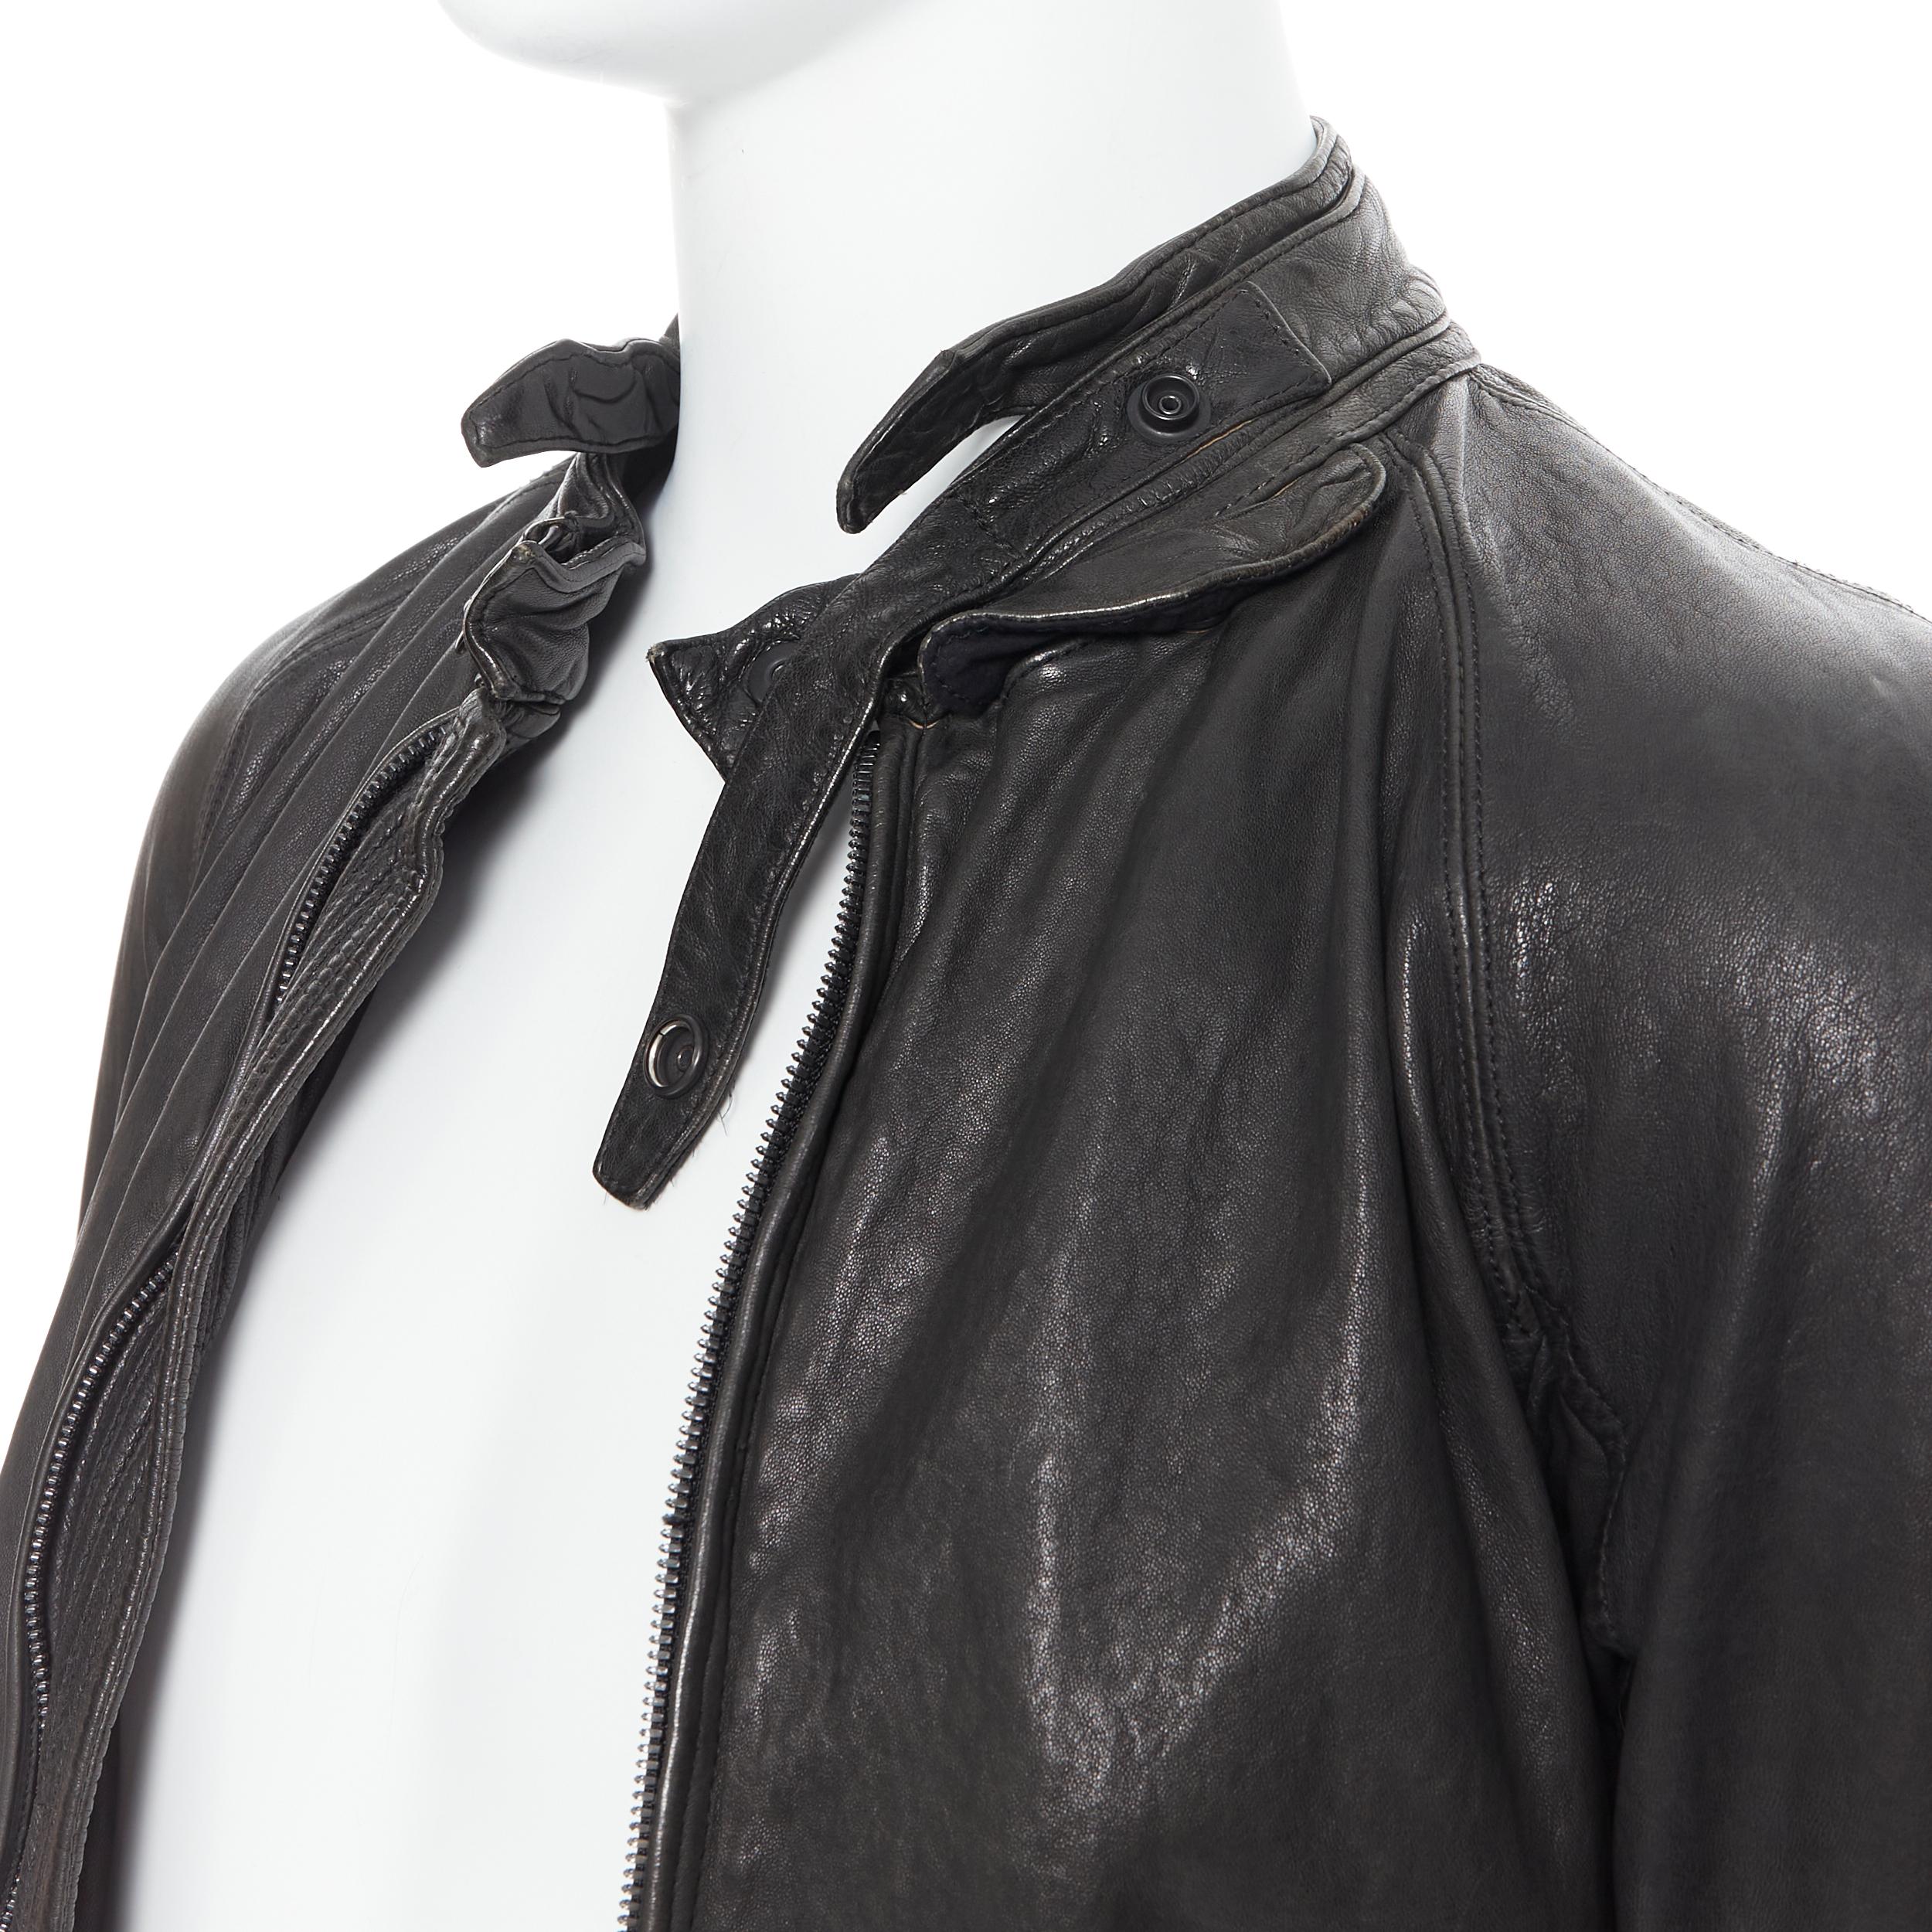 new MA JULIUS black tumbled soft lamb leather collarless zip biker jacket S Reference: PRCN/A00047 Brand: Ma Julius Collection: Fall Winter 2014 Material: Leather Color: Black Pattern: Solid Closure: Zip Extra Detail: Genuine lamb leather. Tumbled